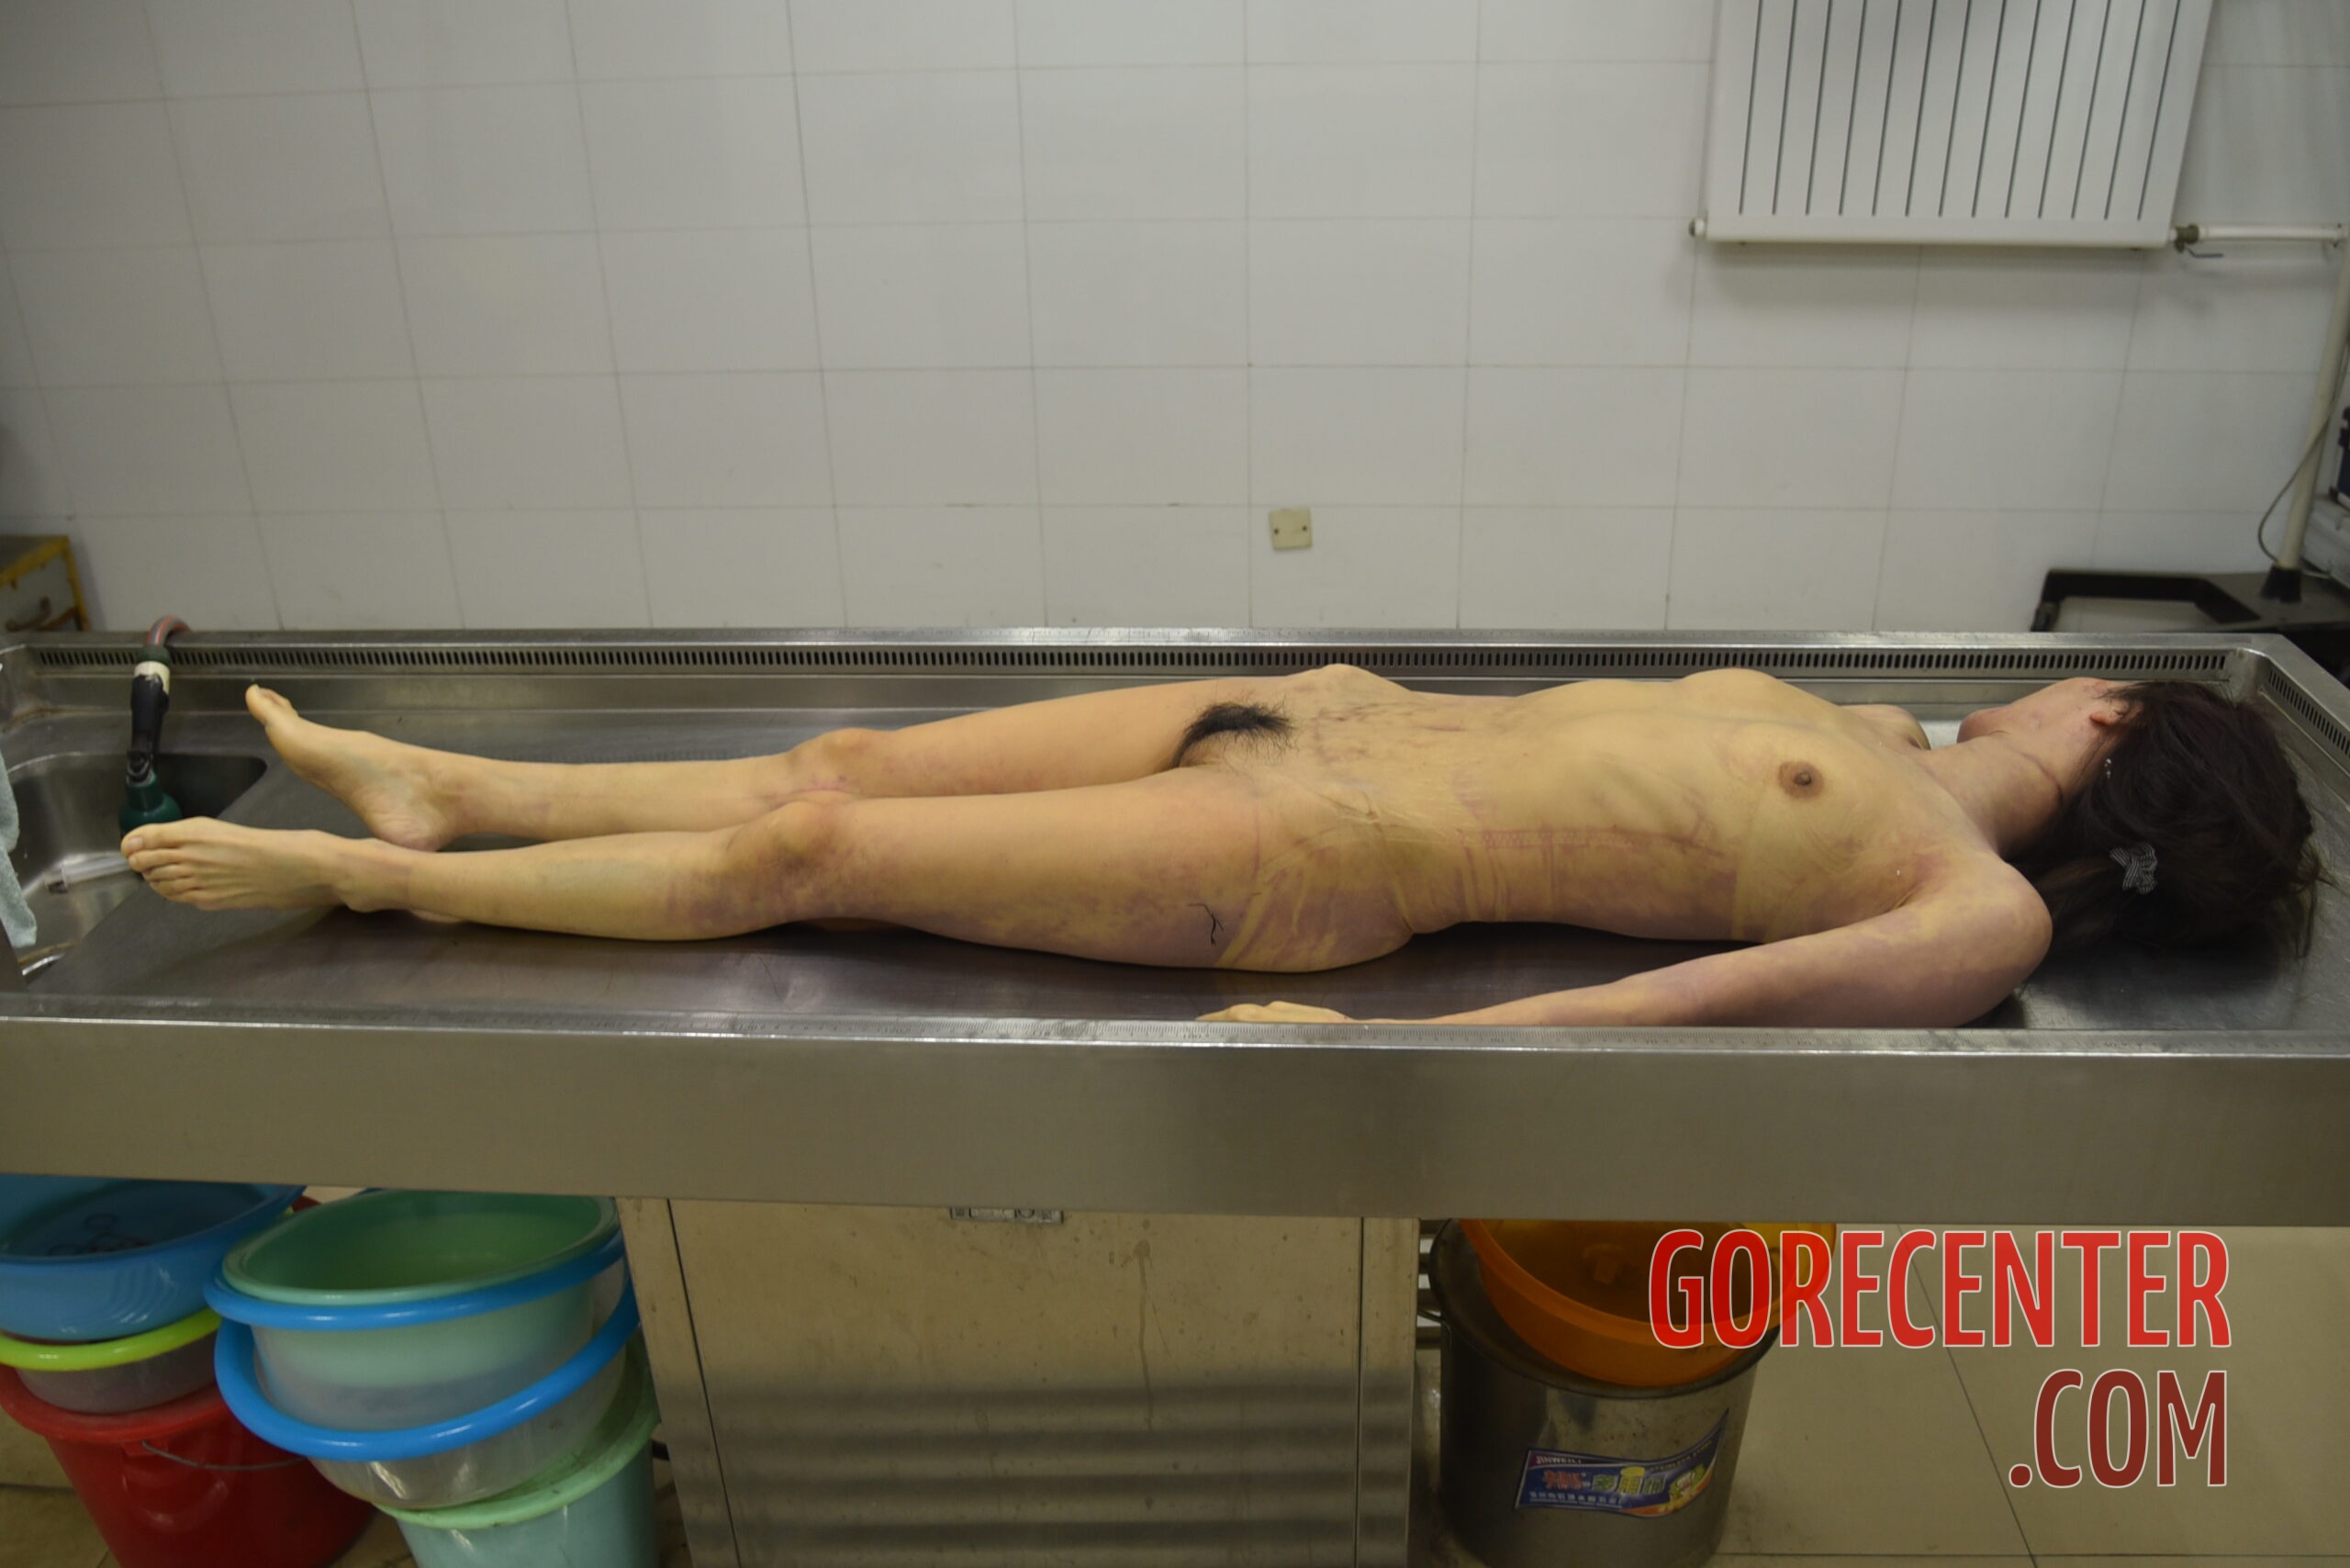 Chinese woman in morgue #7.